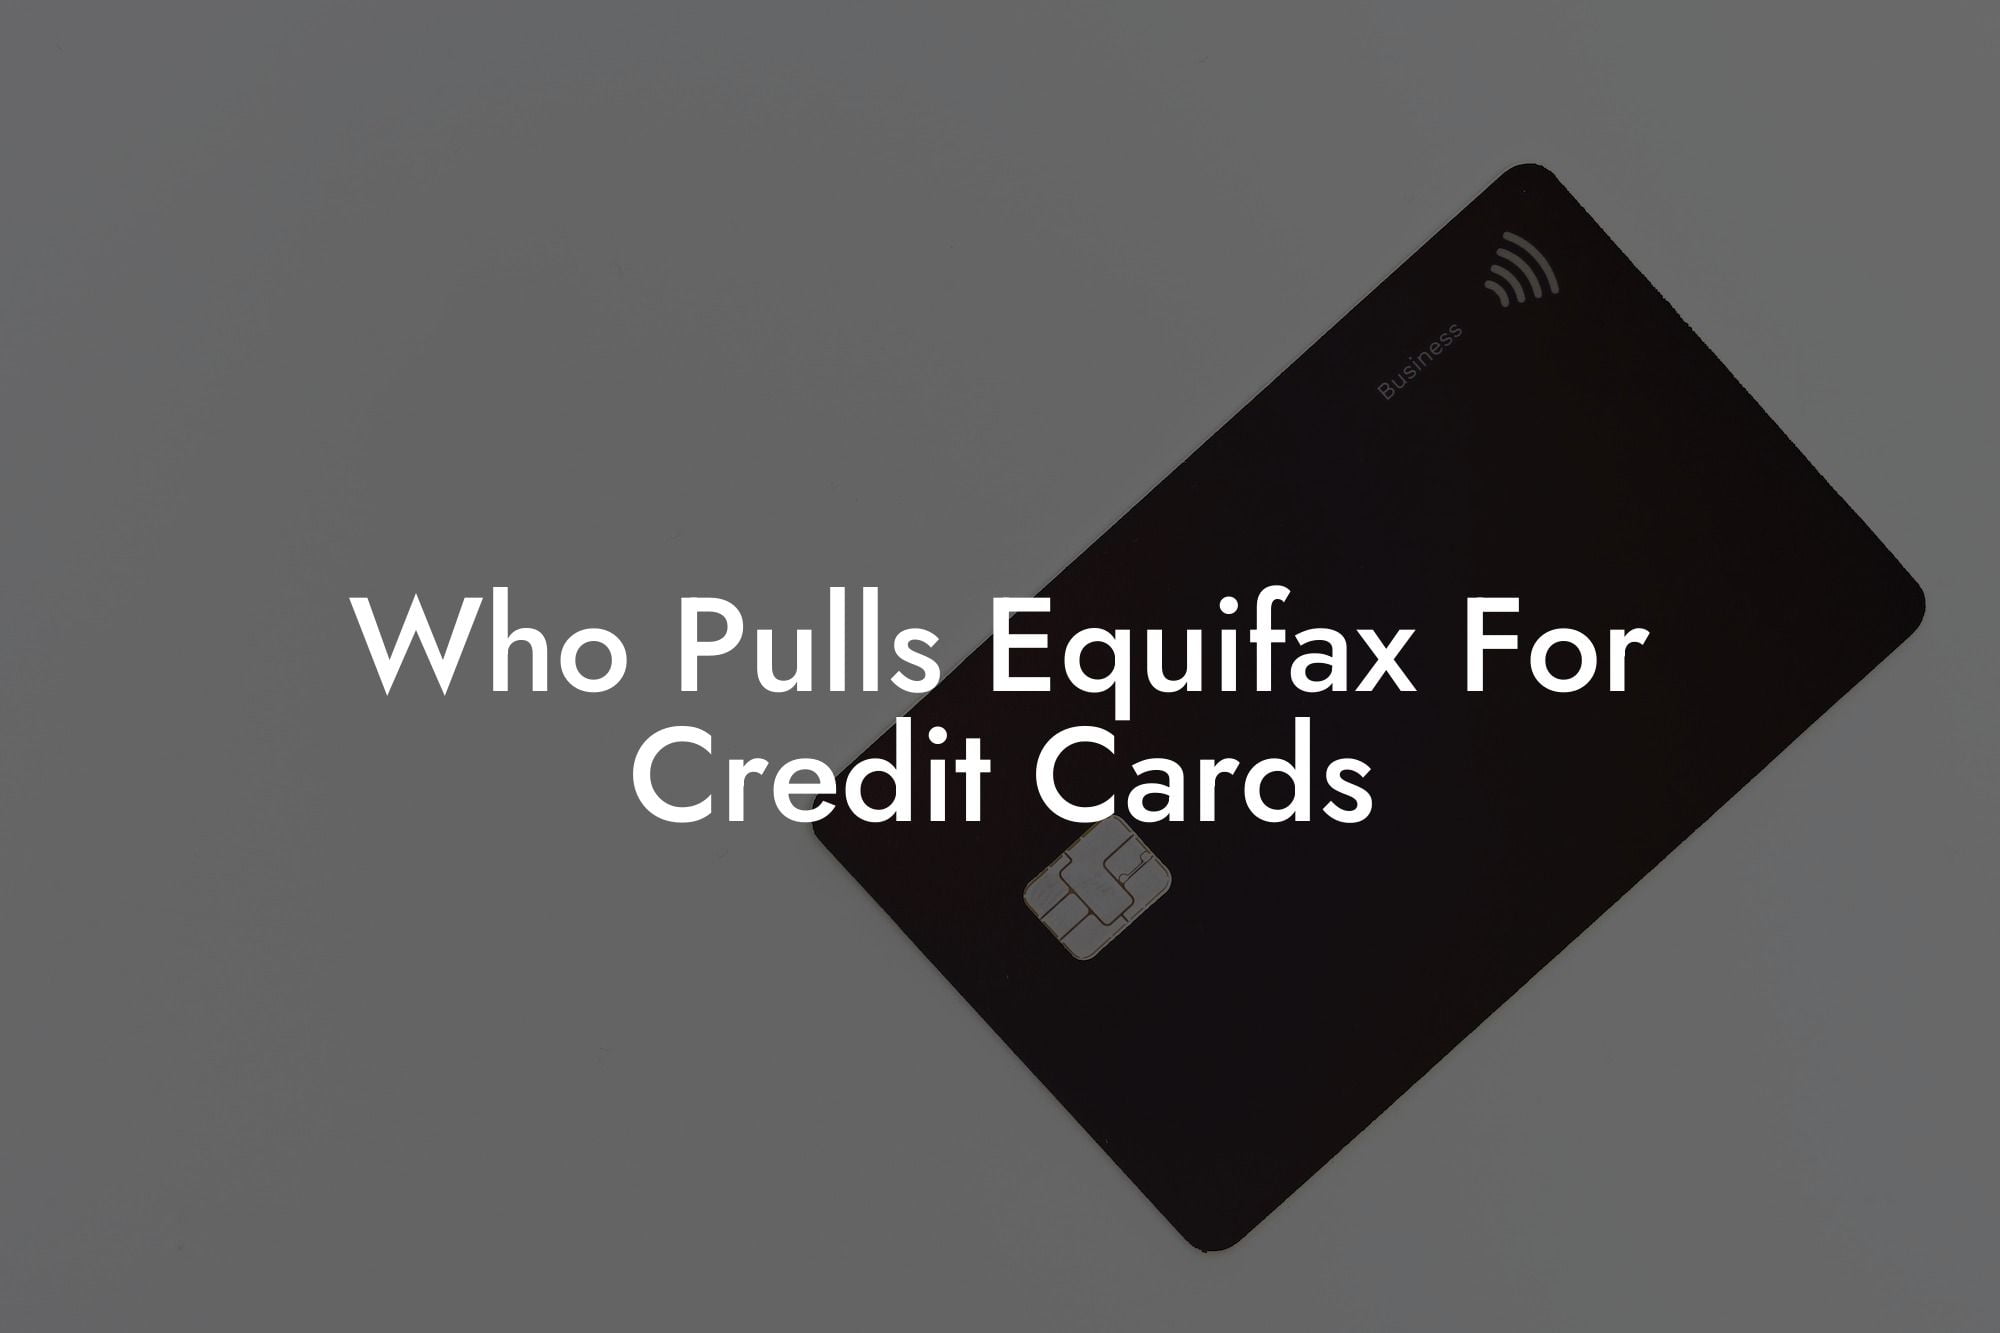 Who Pulls Equifax For Credit Cards